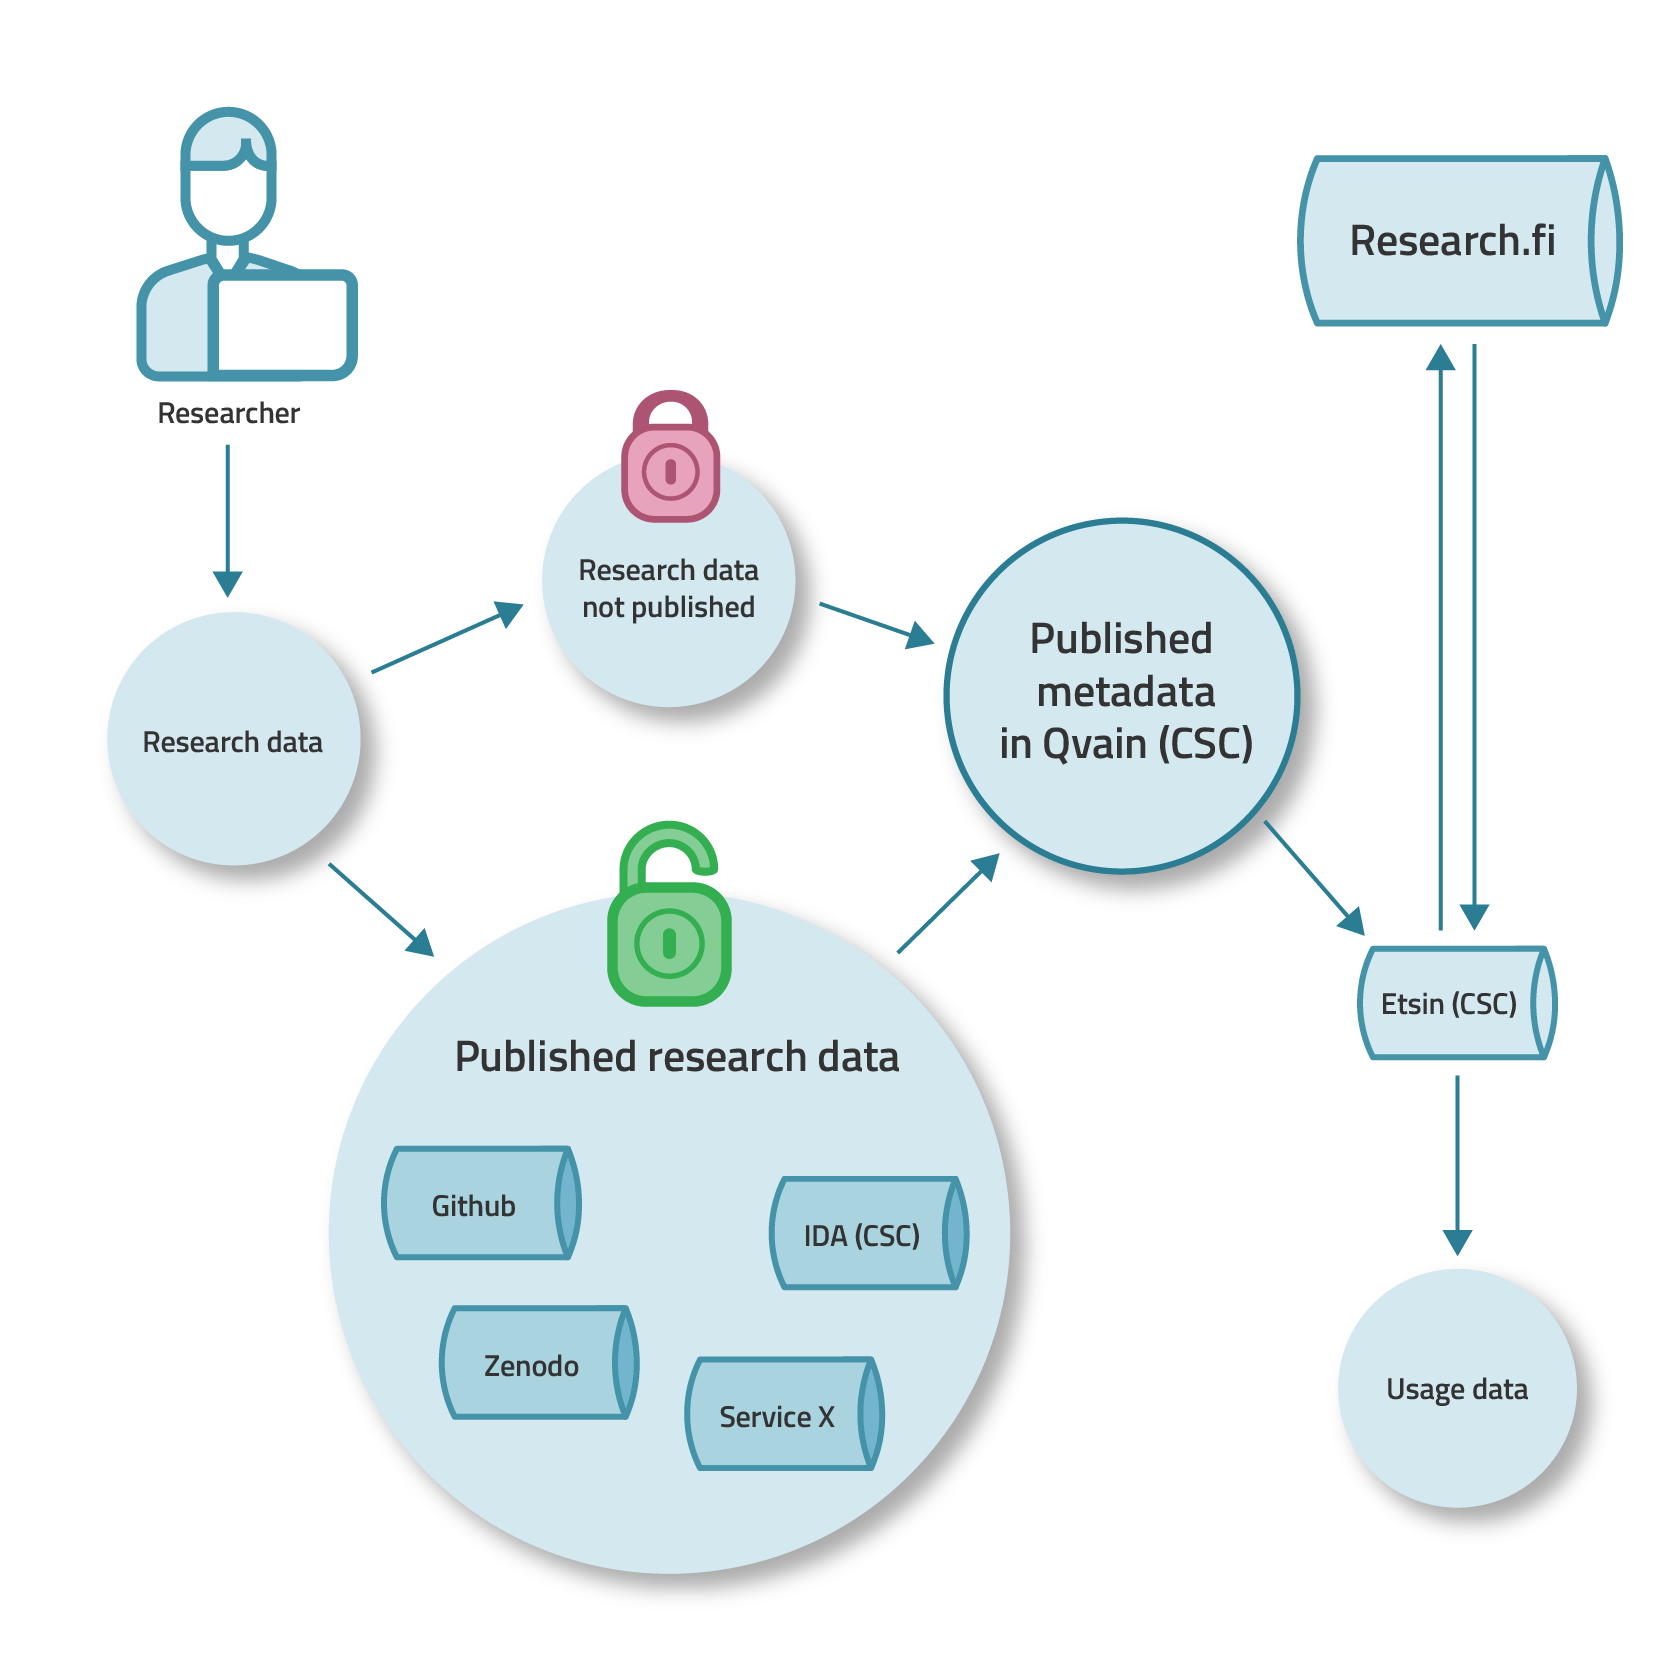 The picture illustrates the process of opening the research data. Metadata for both open and closed data are published using the Qvain tool. Through this tool, the metadata of the data can be found on both Research.fi and Etsin services.